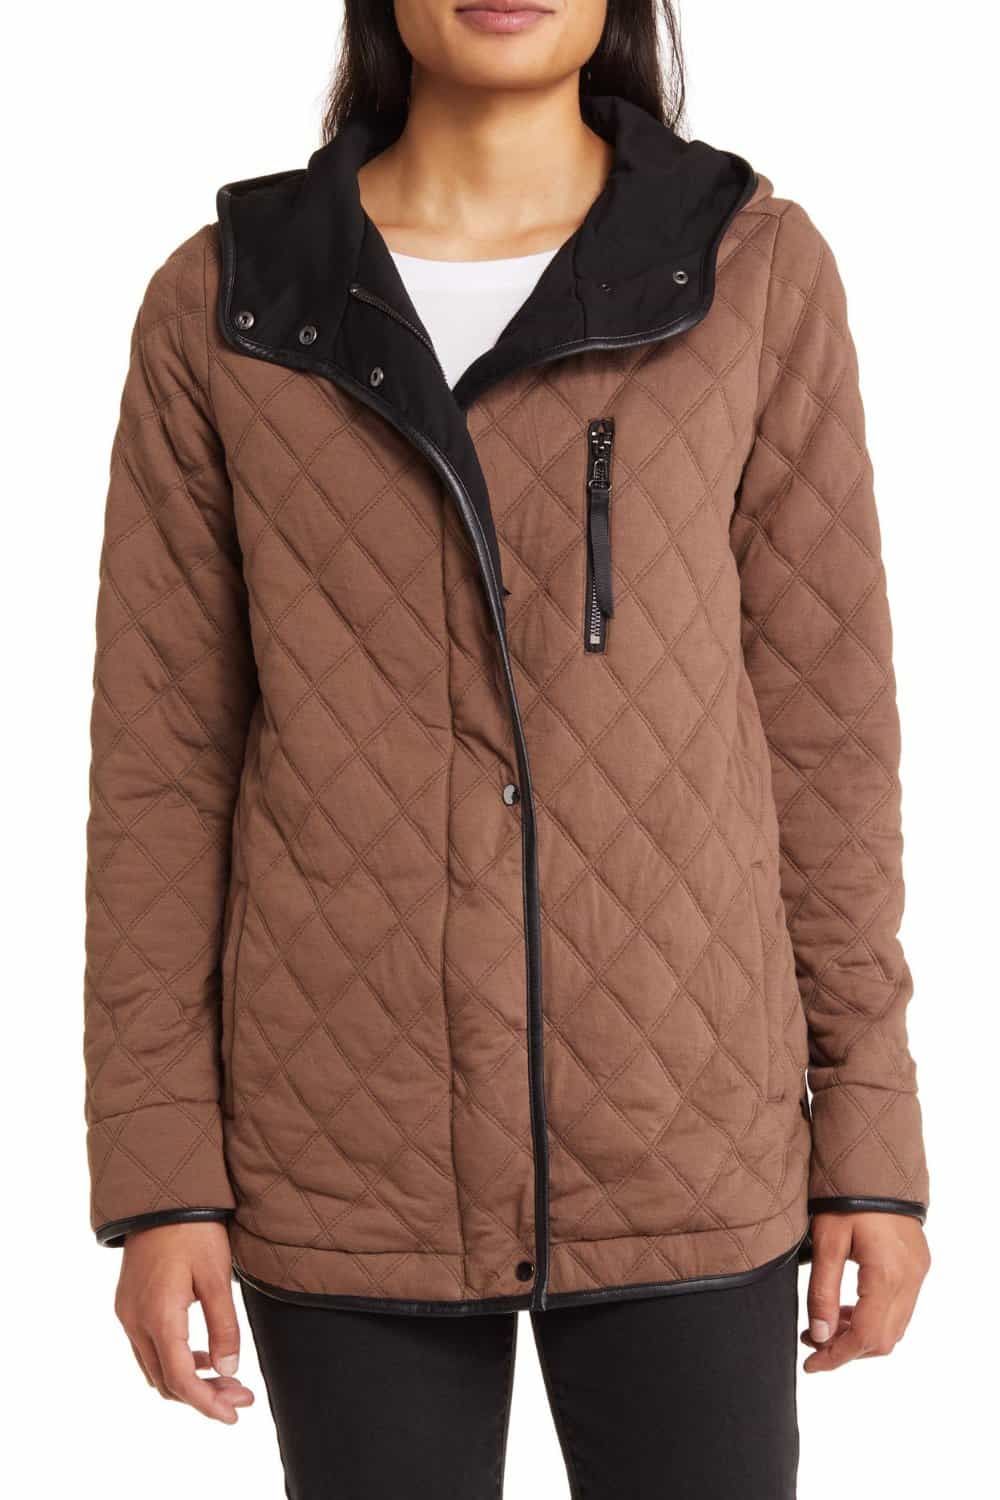 LYSSÉ London Quilted Oversize Hooded Jacket